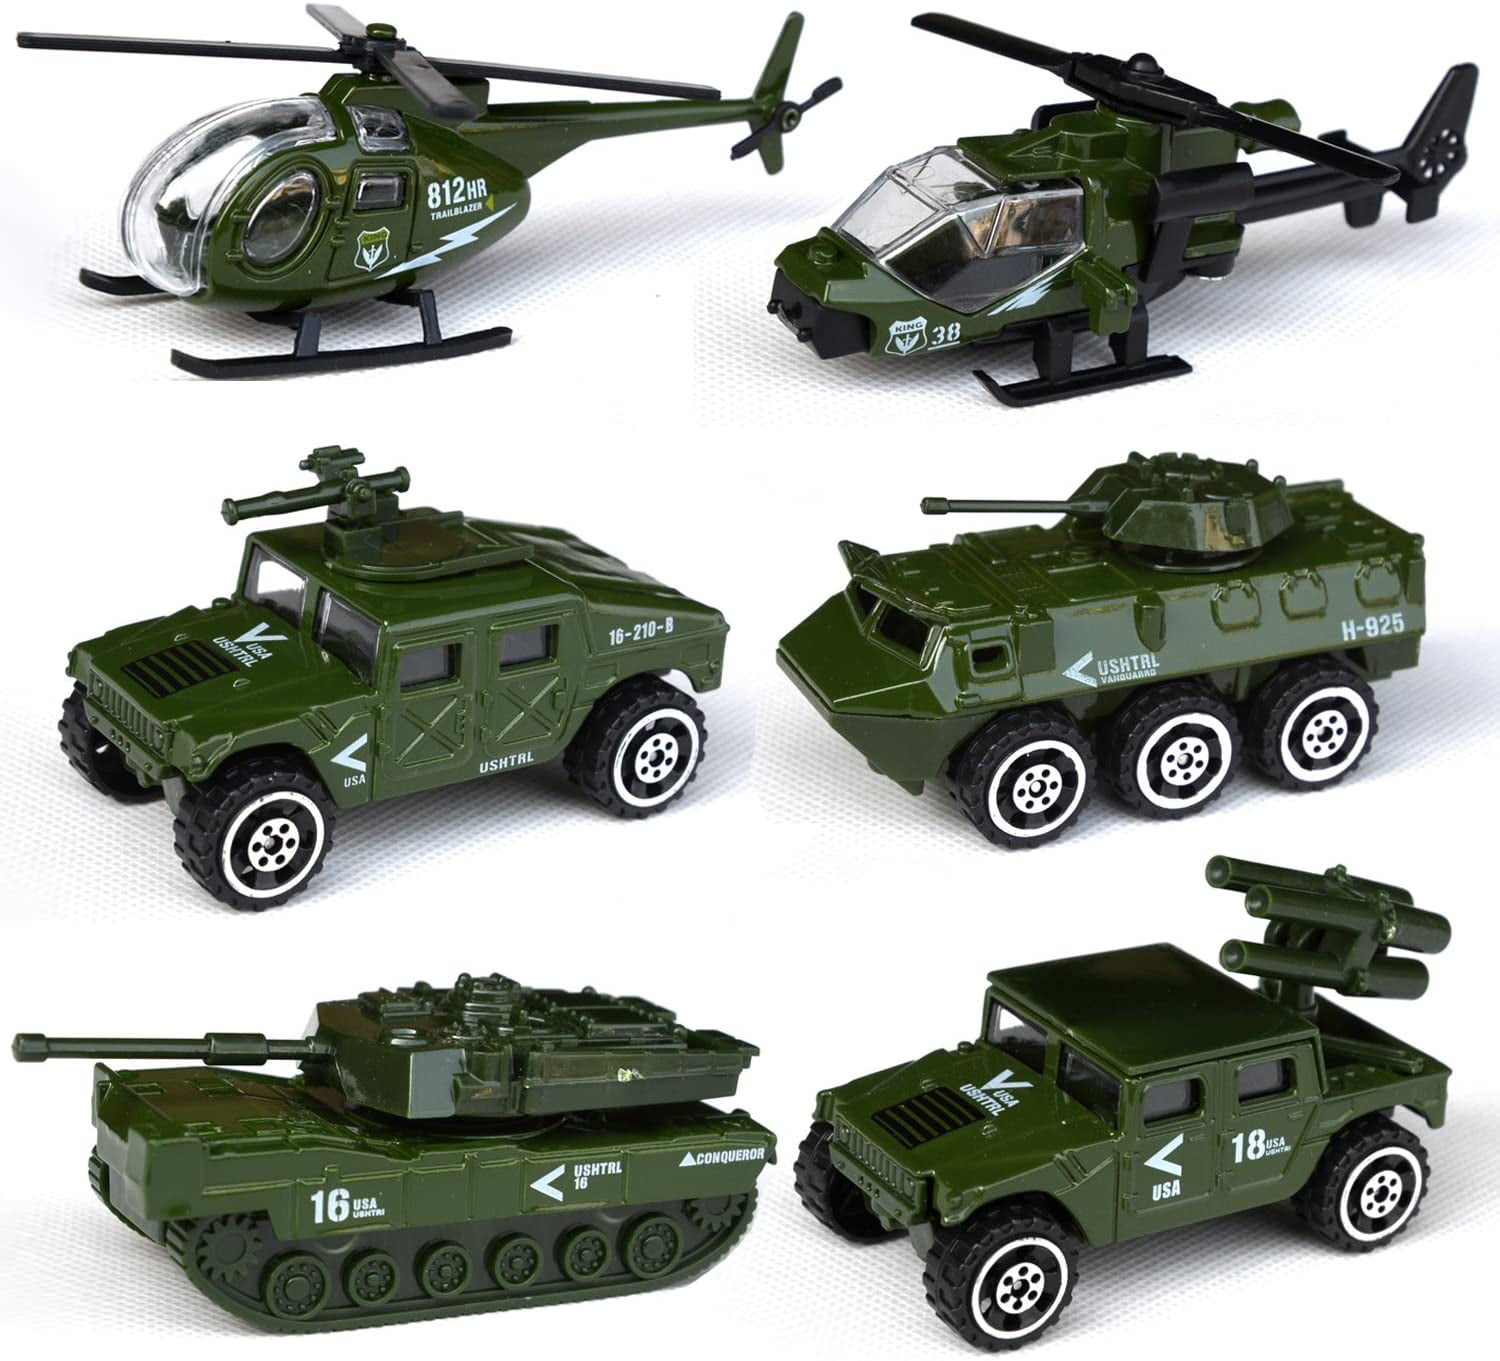 1:87 Diecast Alloy Military Vehicles Tank Toy Helicopter Playset for Kids 